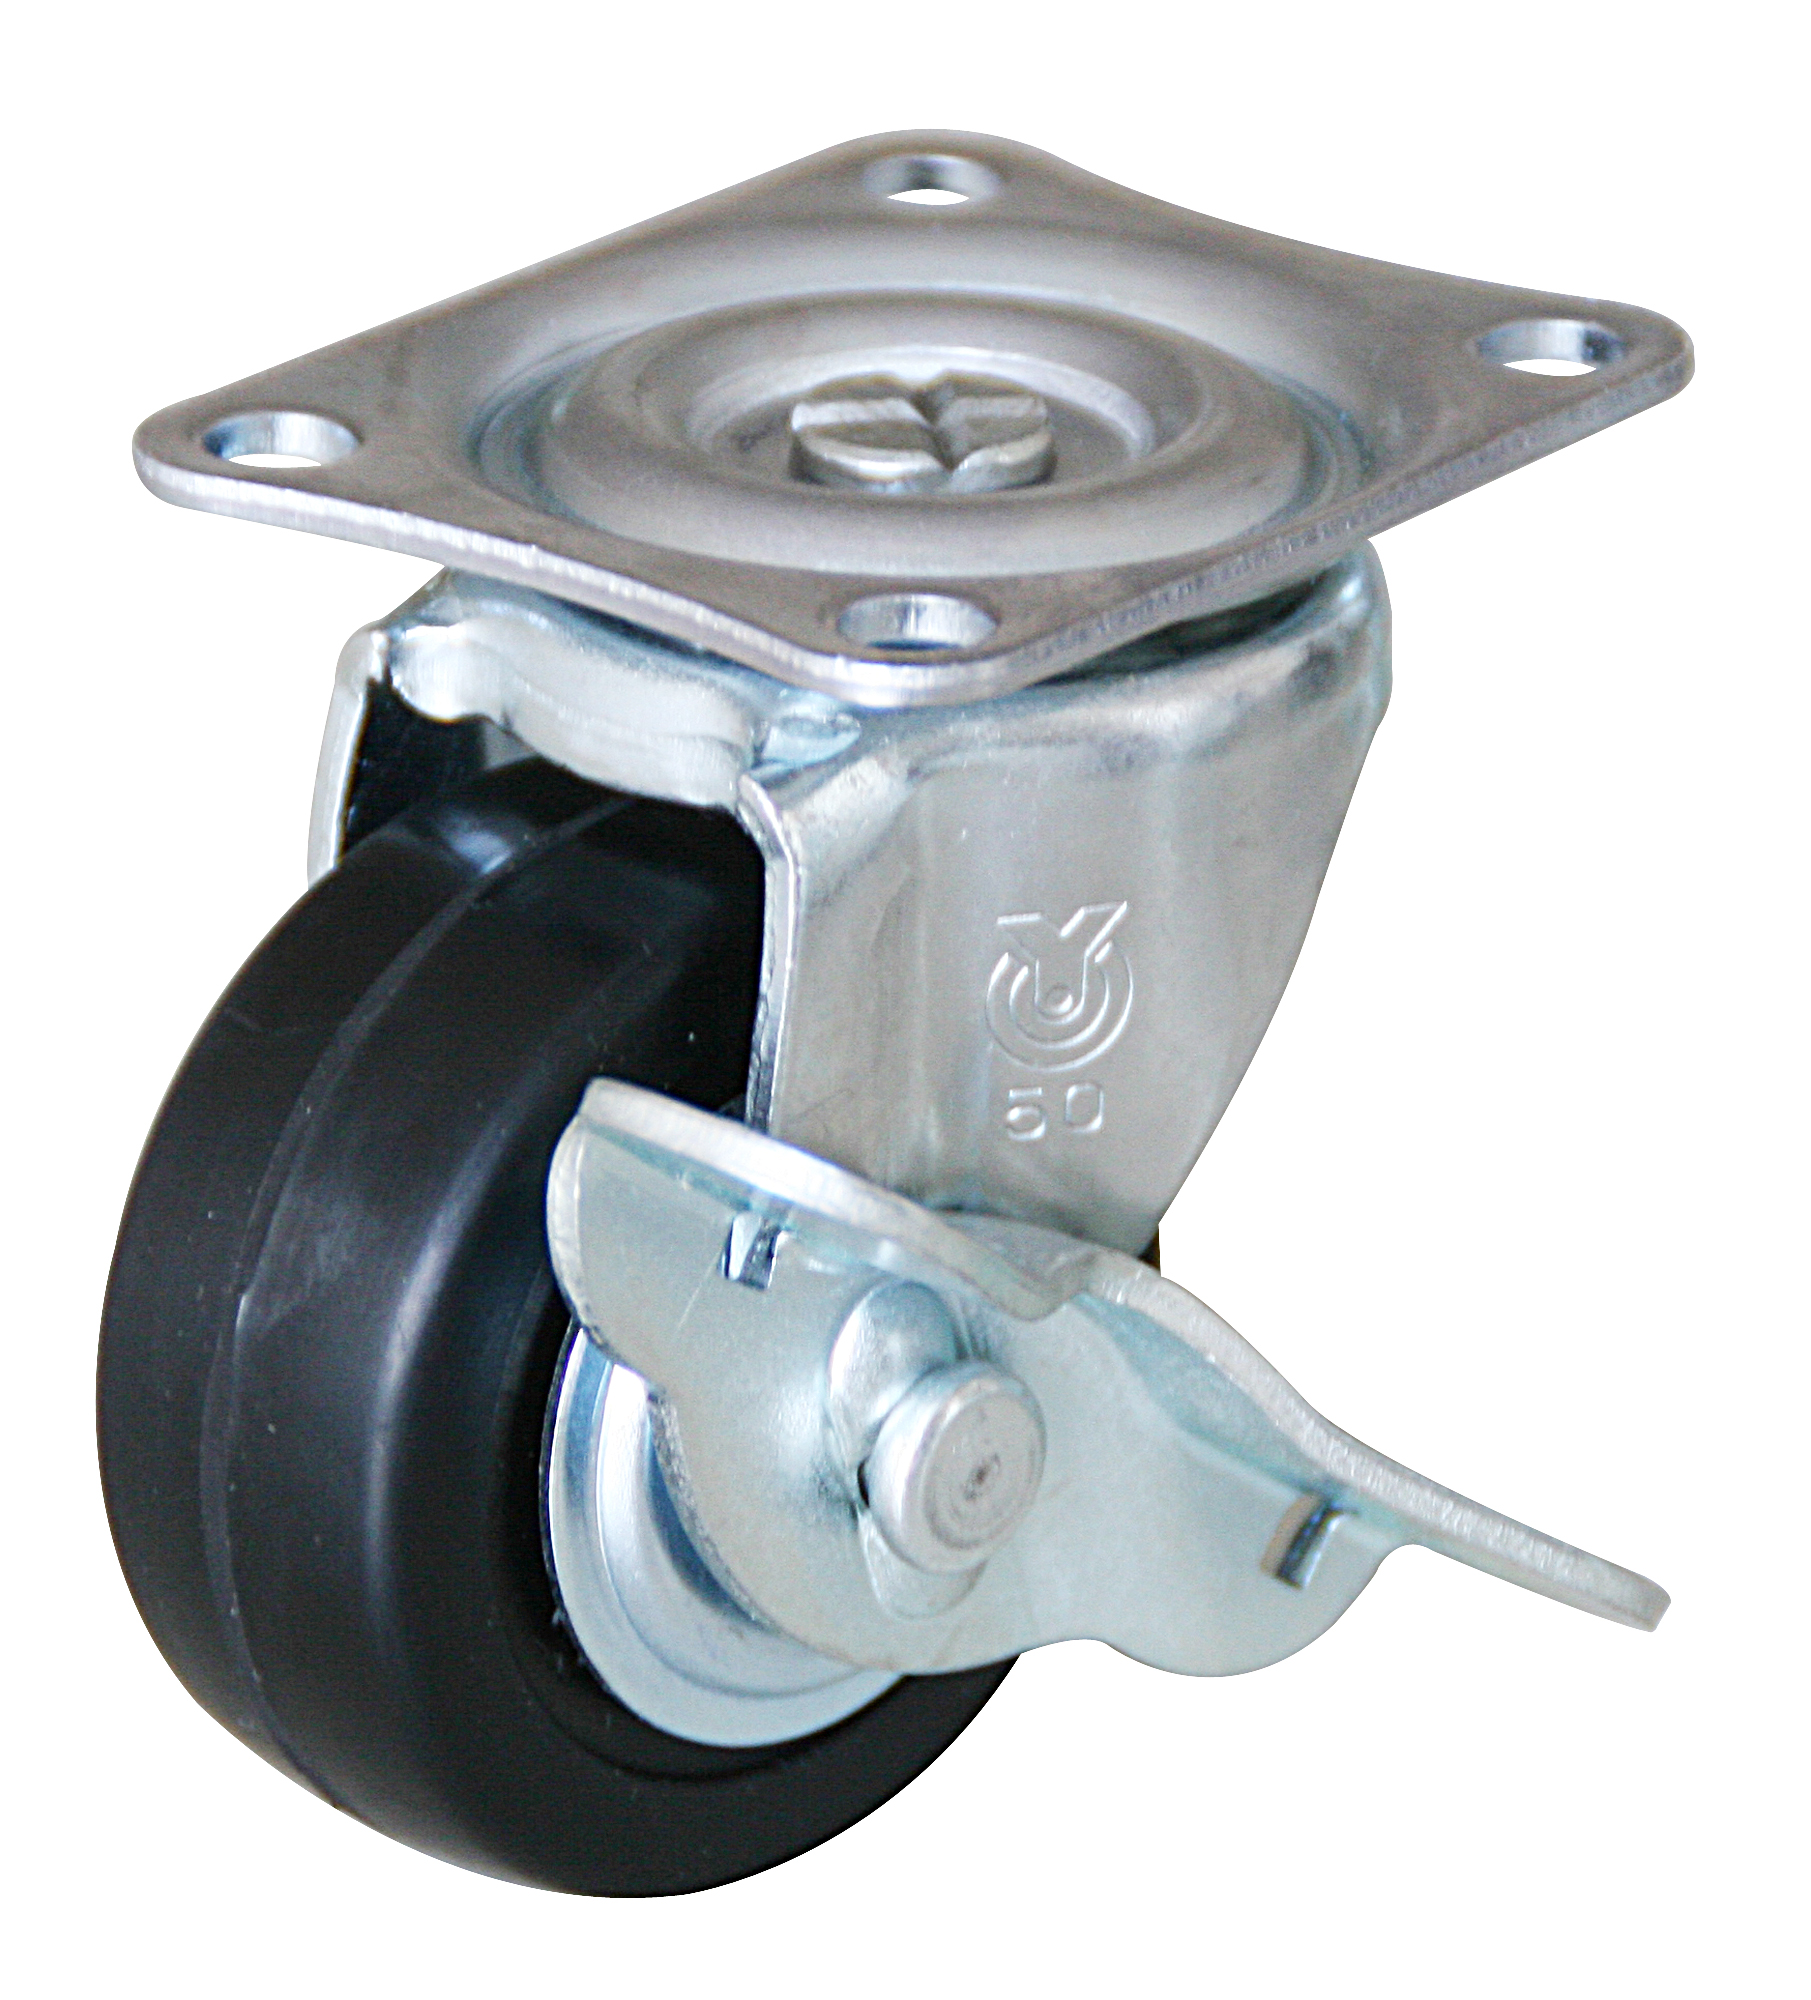 Casters - With swivel plate, G-S series. G-65ELS